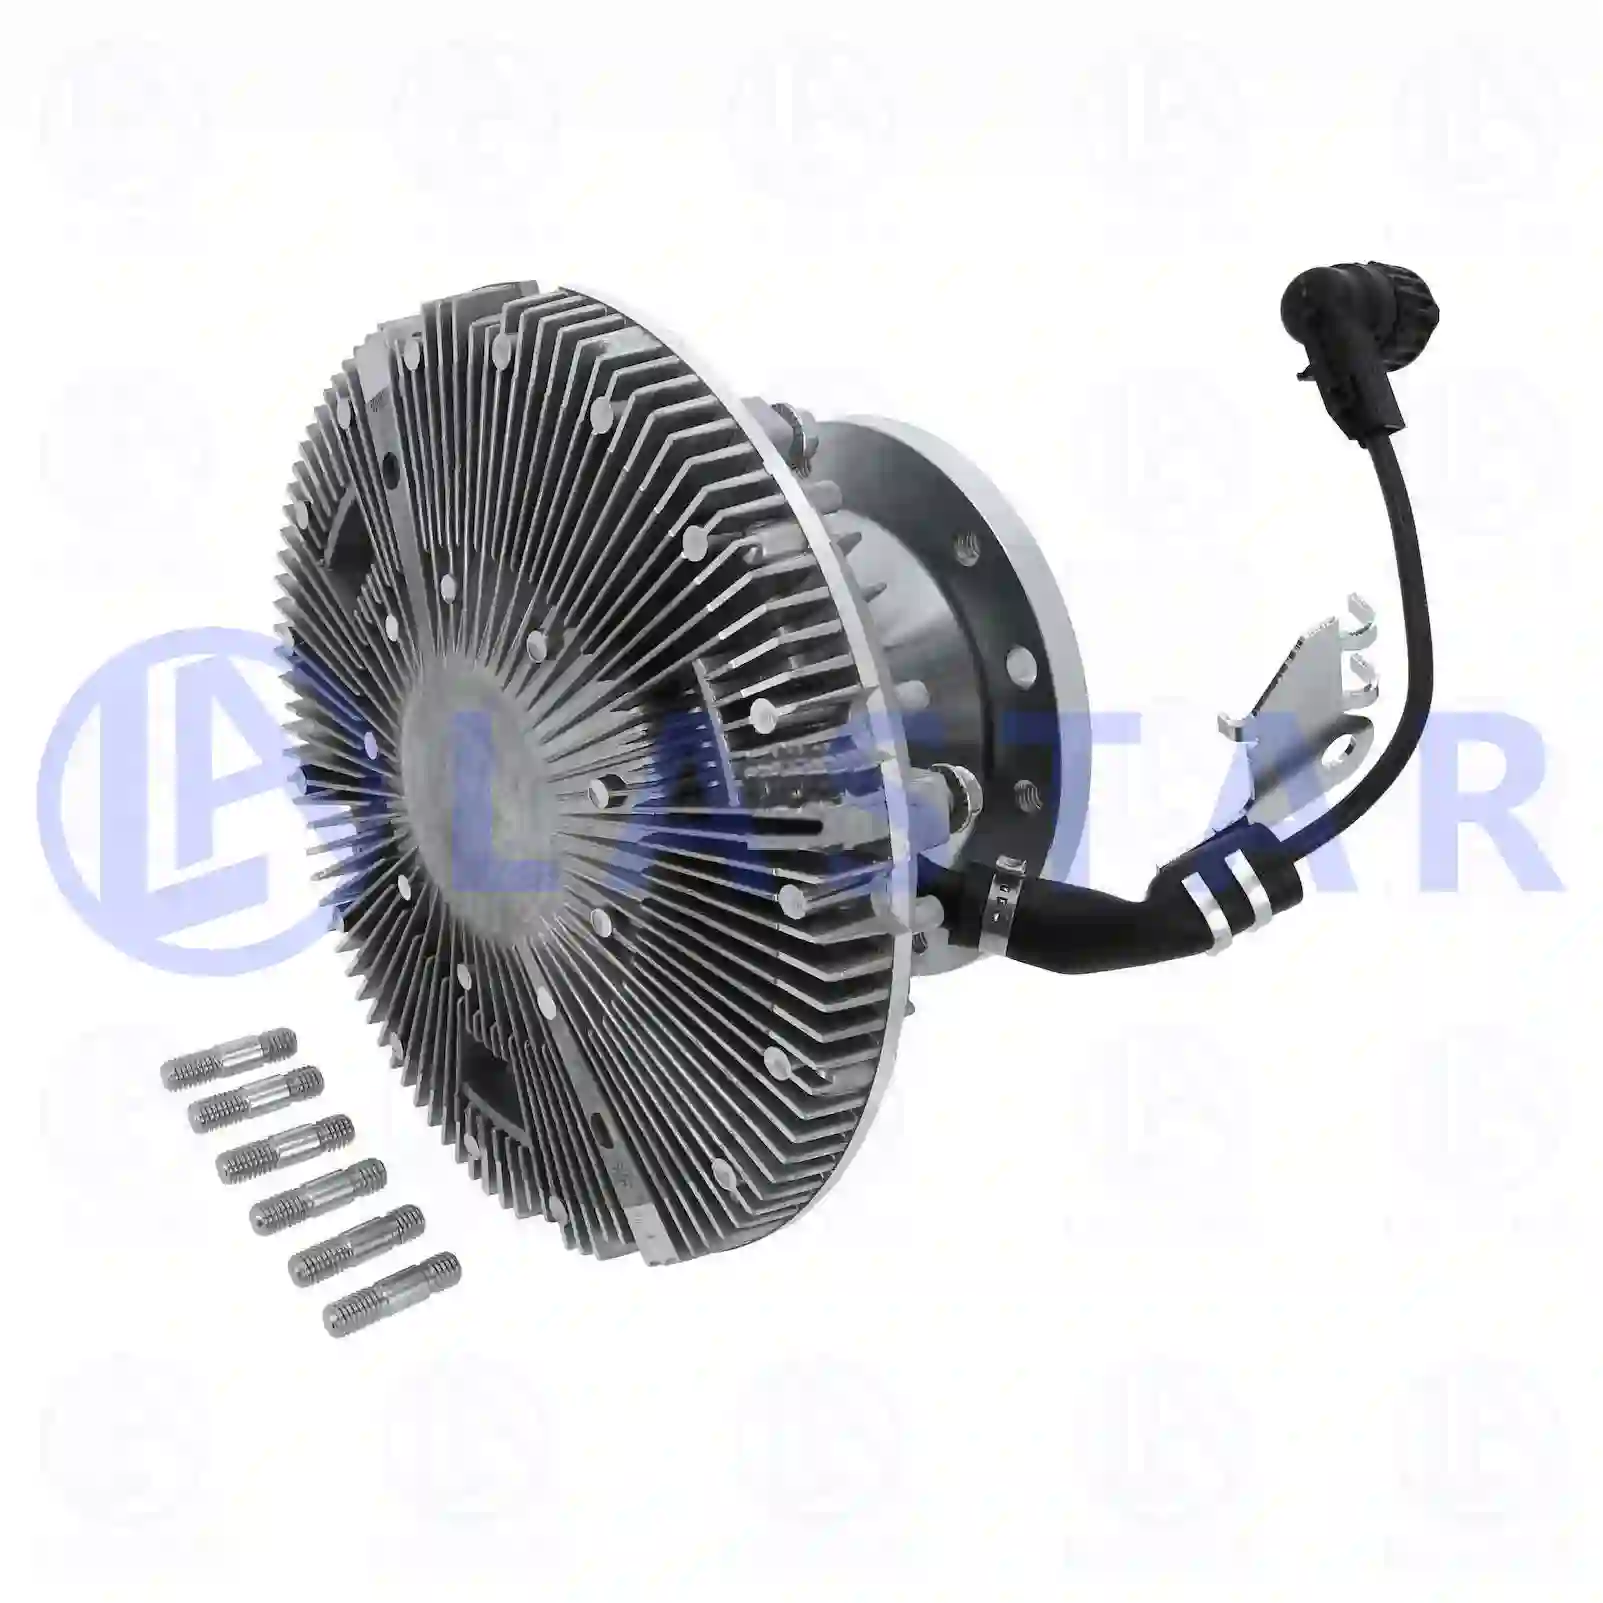 Fan clutch, 77707974, 0002008522, 5412000922, 5412001322, 5412001622 ||  77707974 Lastar Spare Part | Truck Spare Parts, Auotomotive Spare Parts Fan clutch, 77707974, 0002008522, 5412000922, 5412001322, 5412001622 ||  77707974 Lastar Spare Part | Truck Spare Parts, Auotomotive Spare Parts